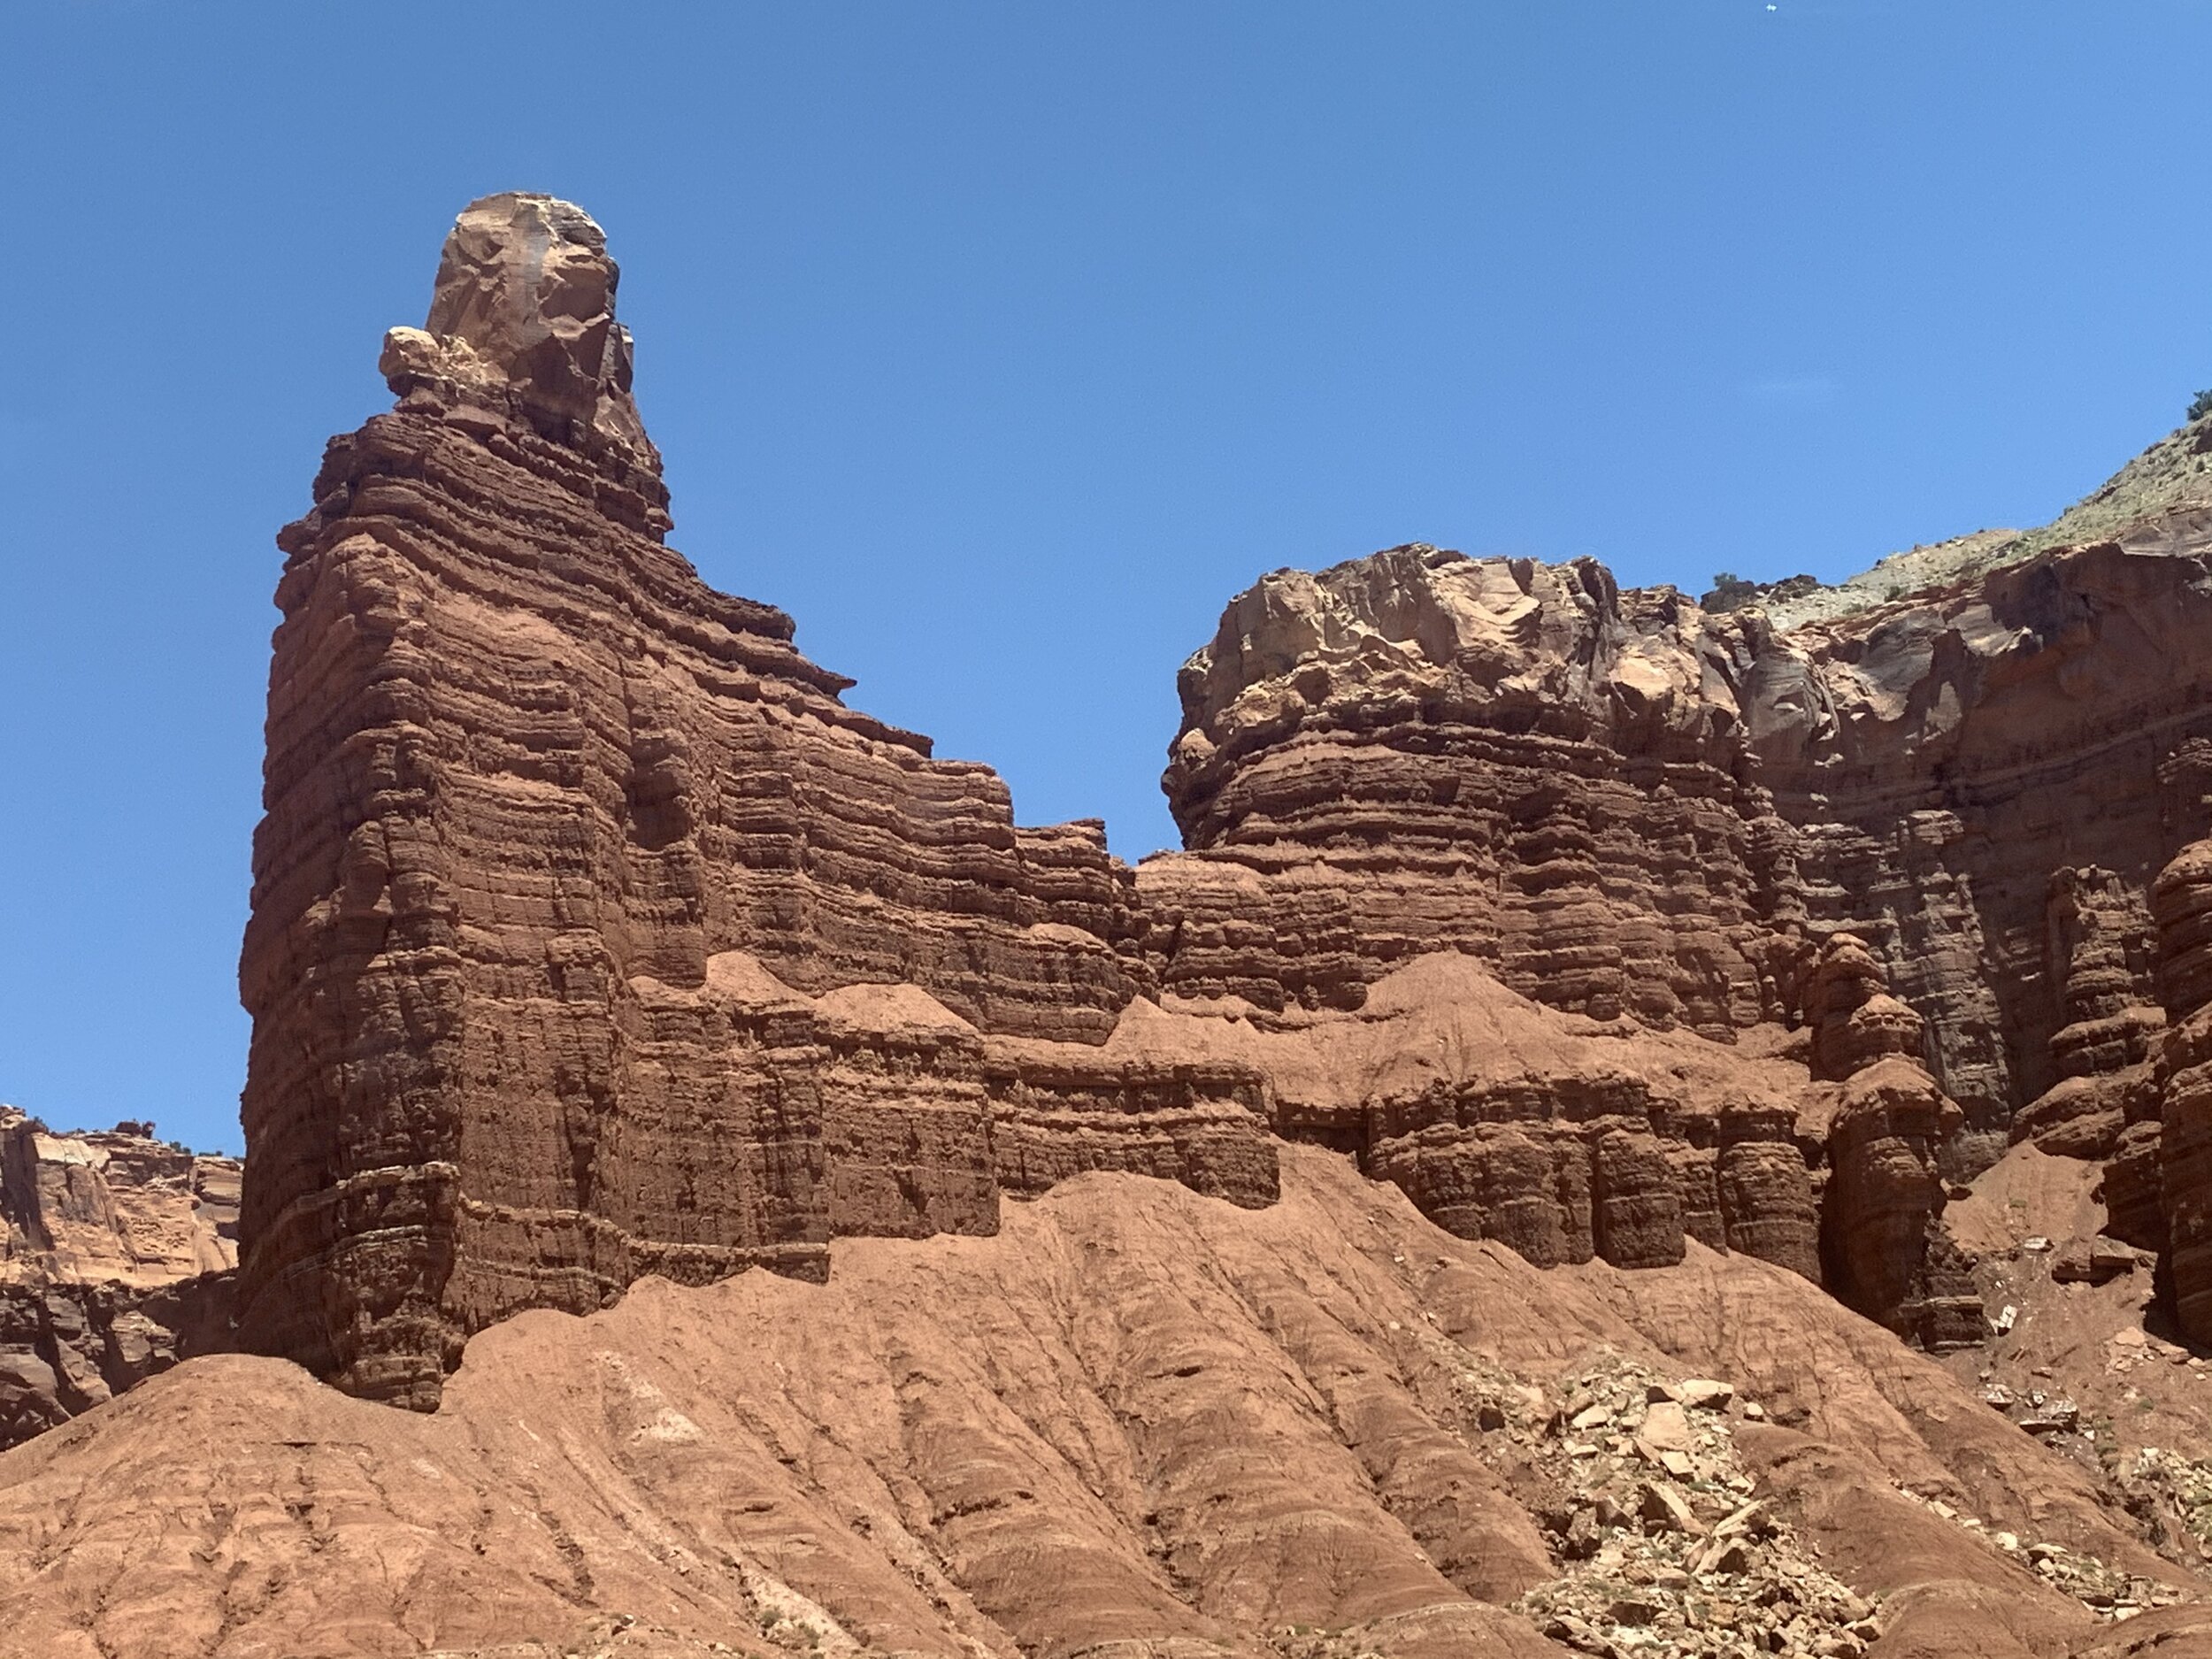  The sandstone is relatively soft, so when the rains do come, little by little, it washes the sandstone to the base of the structures. The sandstone at the base of Chimney Rock, is the result of rain over the course of millions of years.  